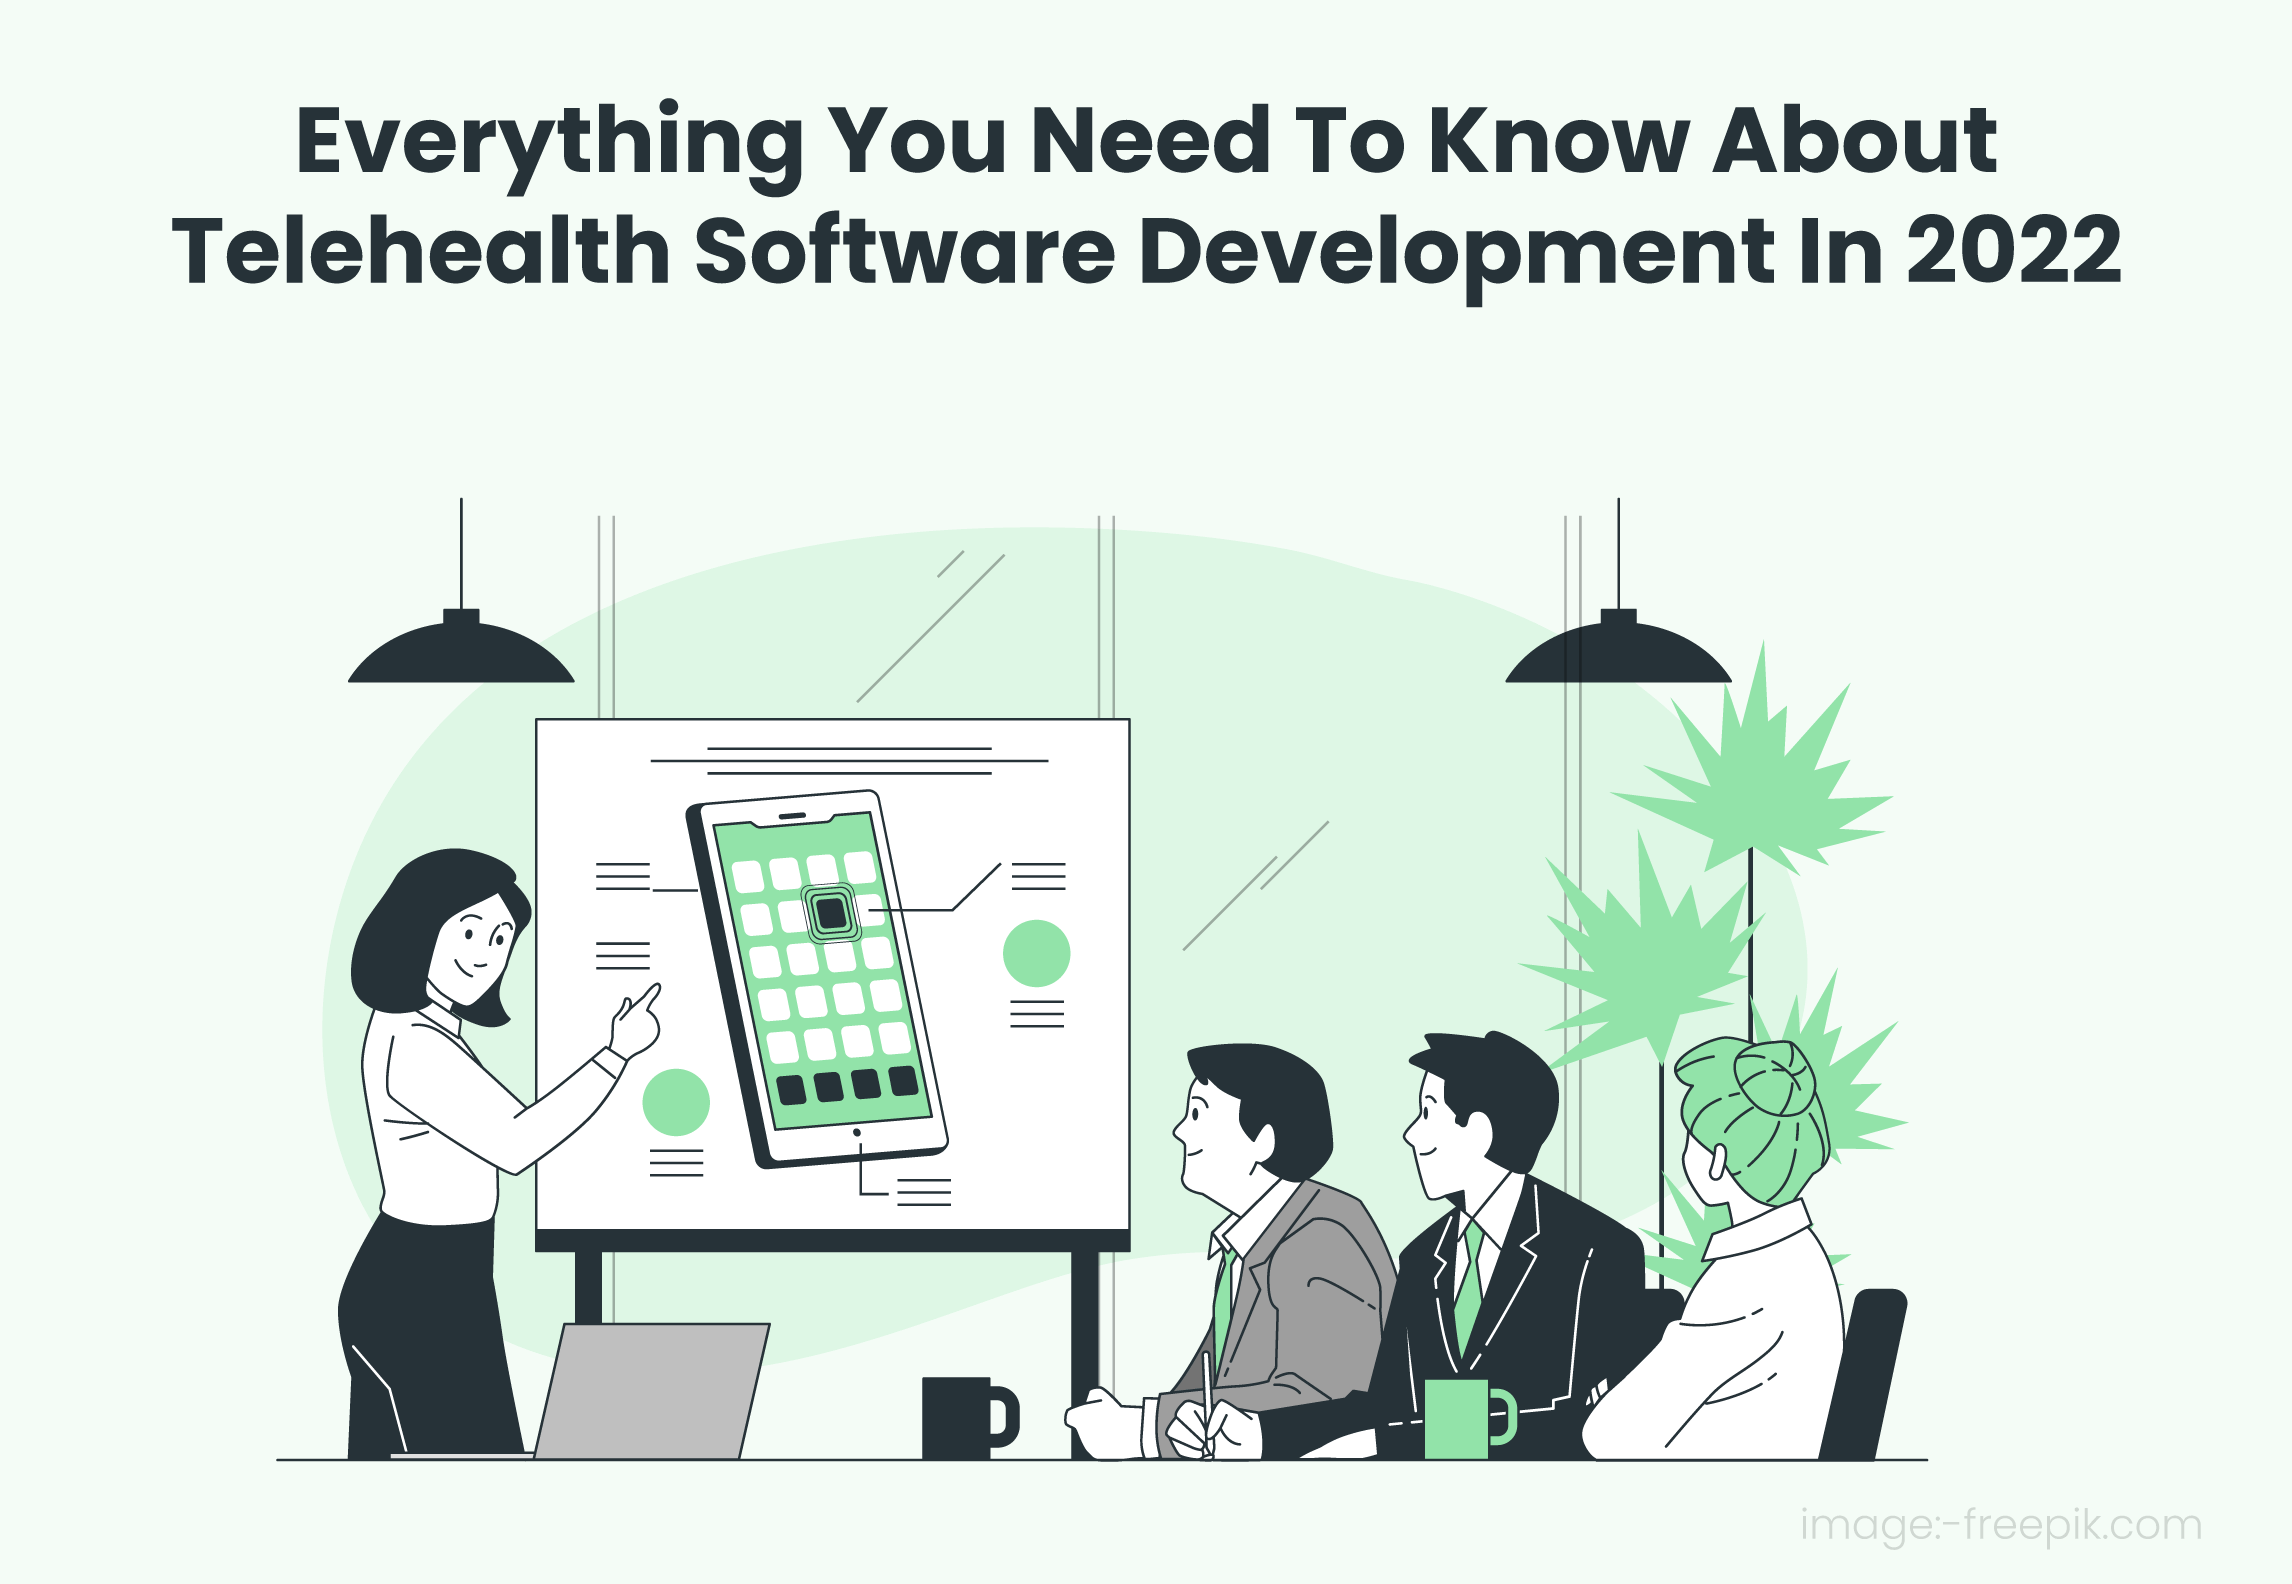 Everything You Need To Know About Telehealth Software Development In 2022